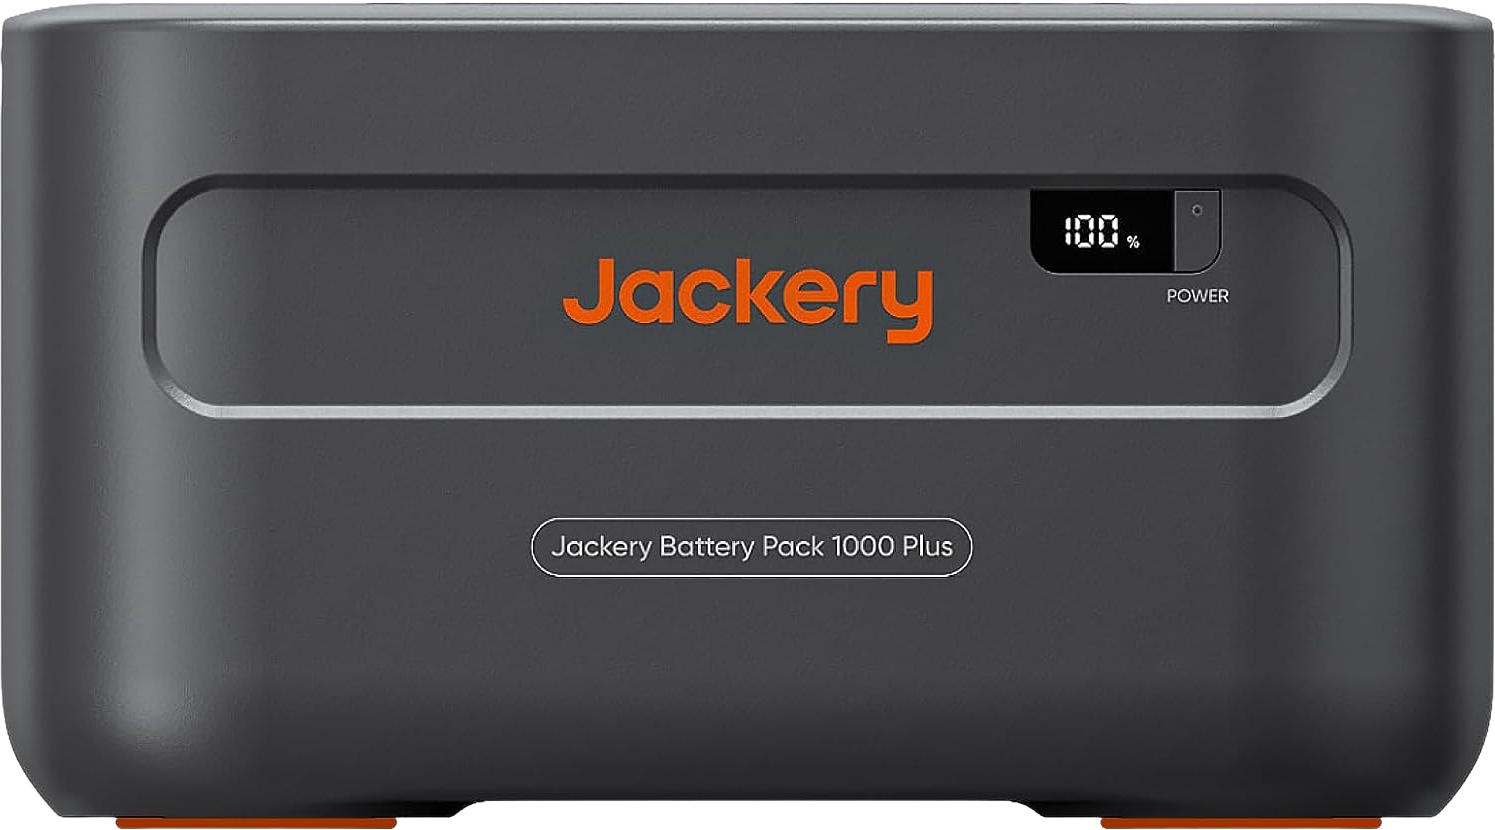 Jackery Battery Pack 1000 Plus 1264Wh 2000W New